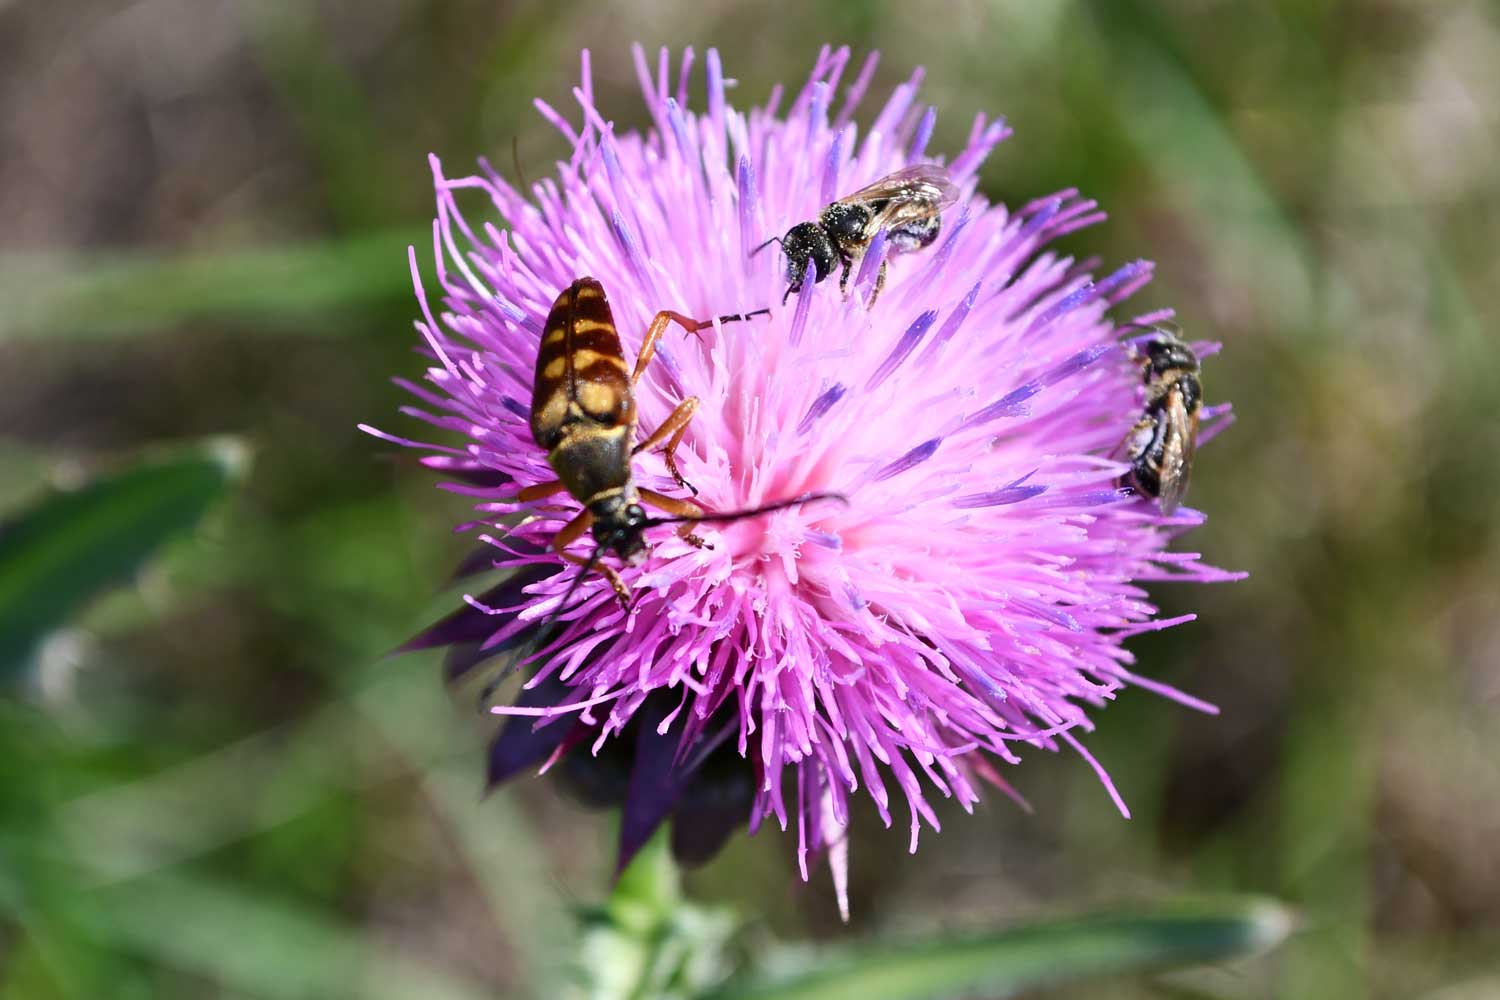 Musk thistle flower bloom with insects.